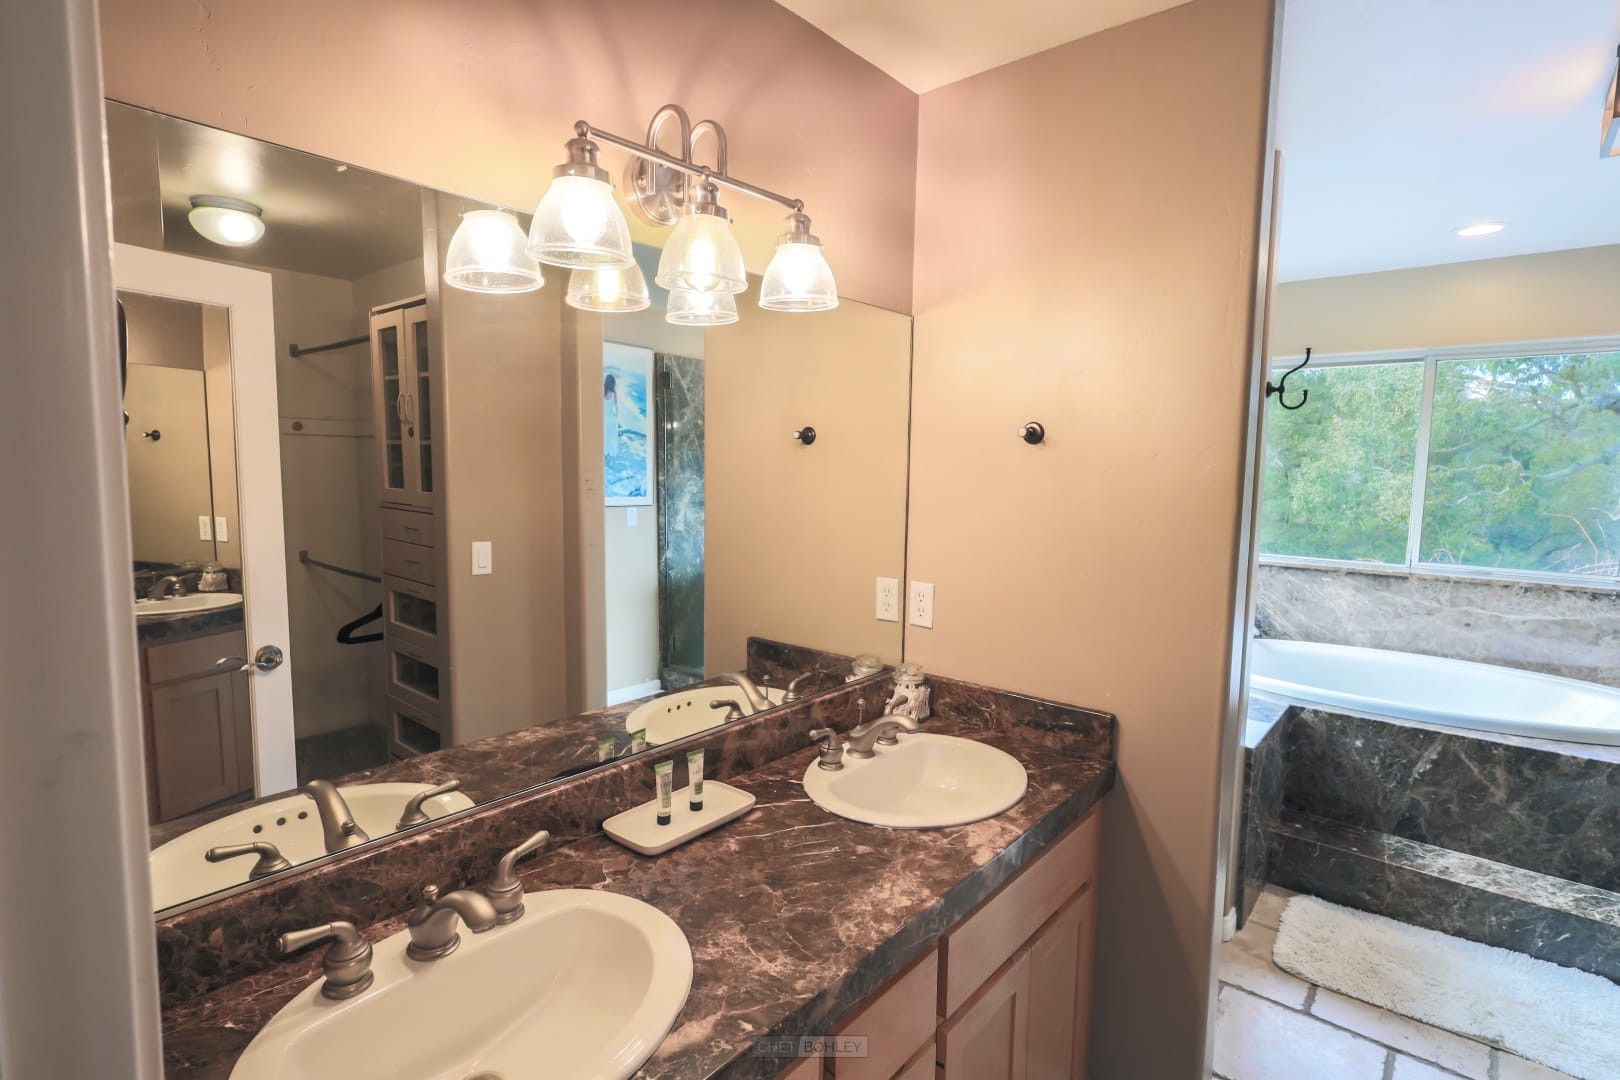 A vacation rental in Morro Bay featuring a bathroom with two sinks and a bathtub.